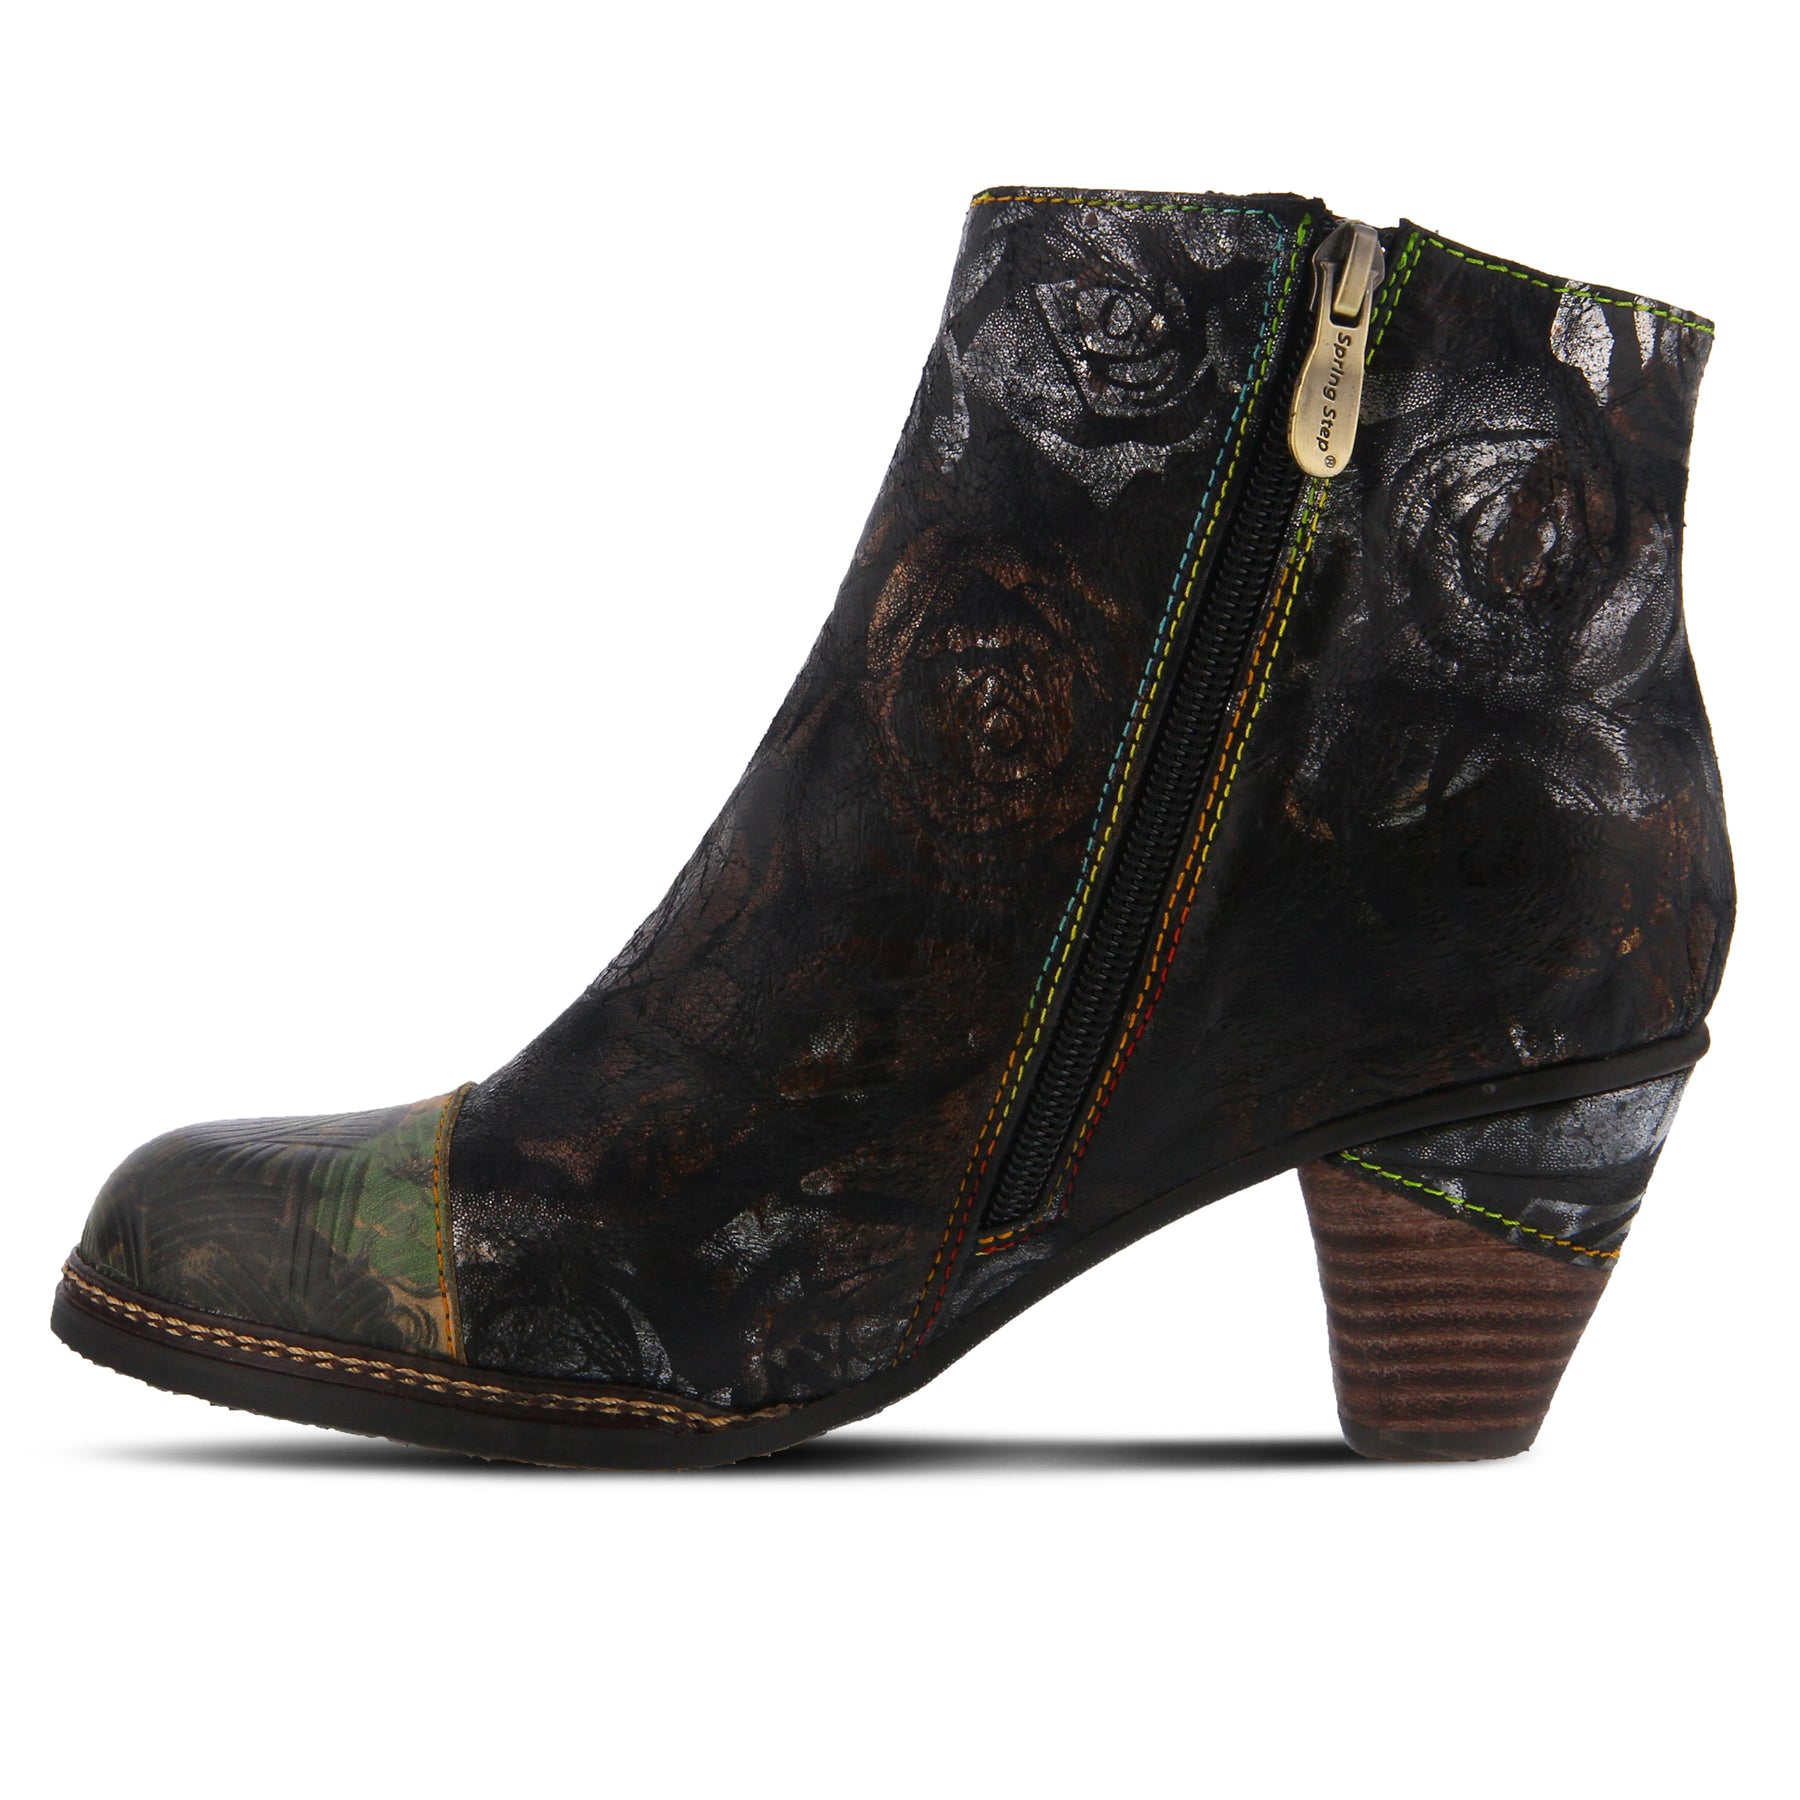 WATERLILY BOOTIE by L'ARTISTE – Spring Step Shoes